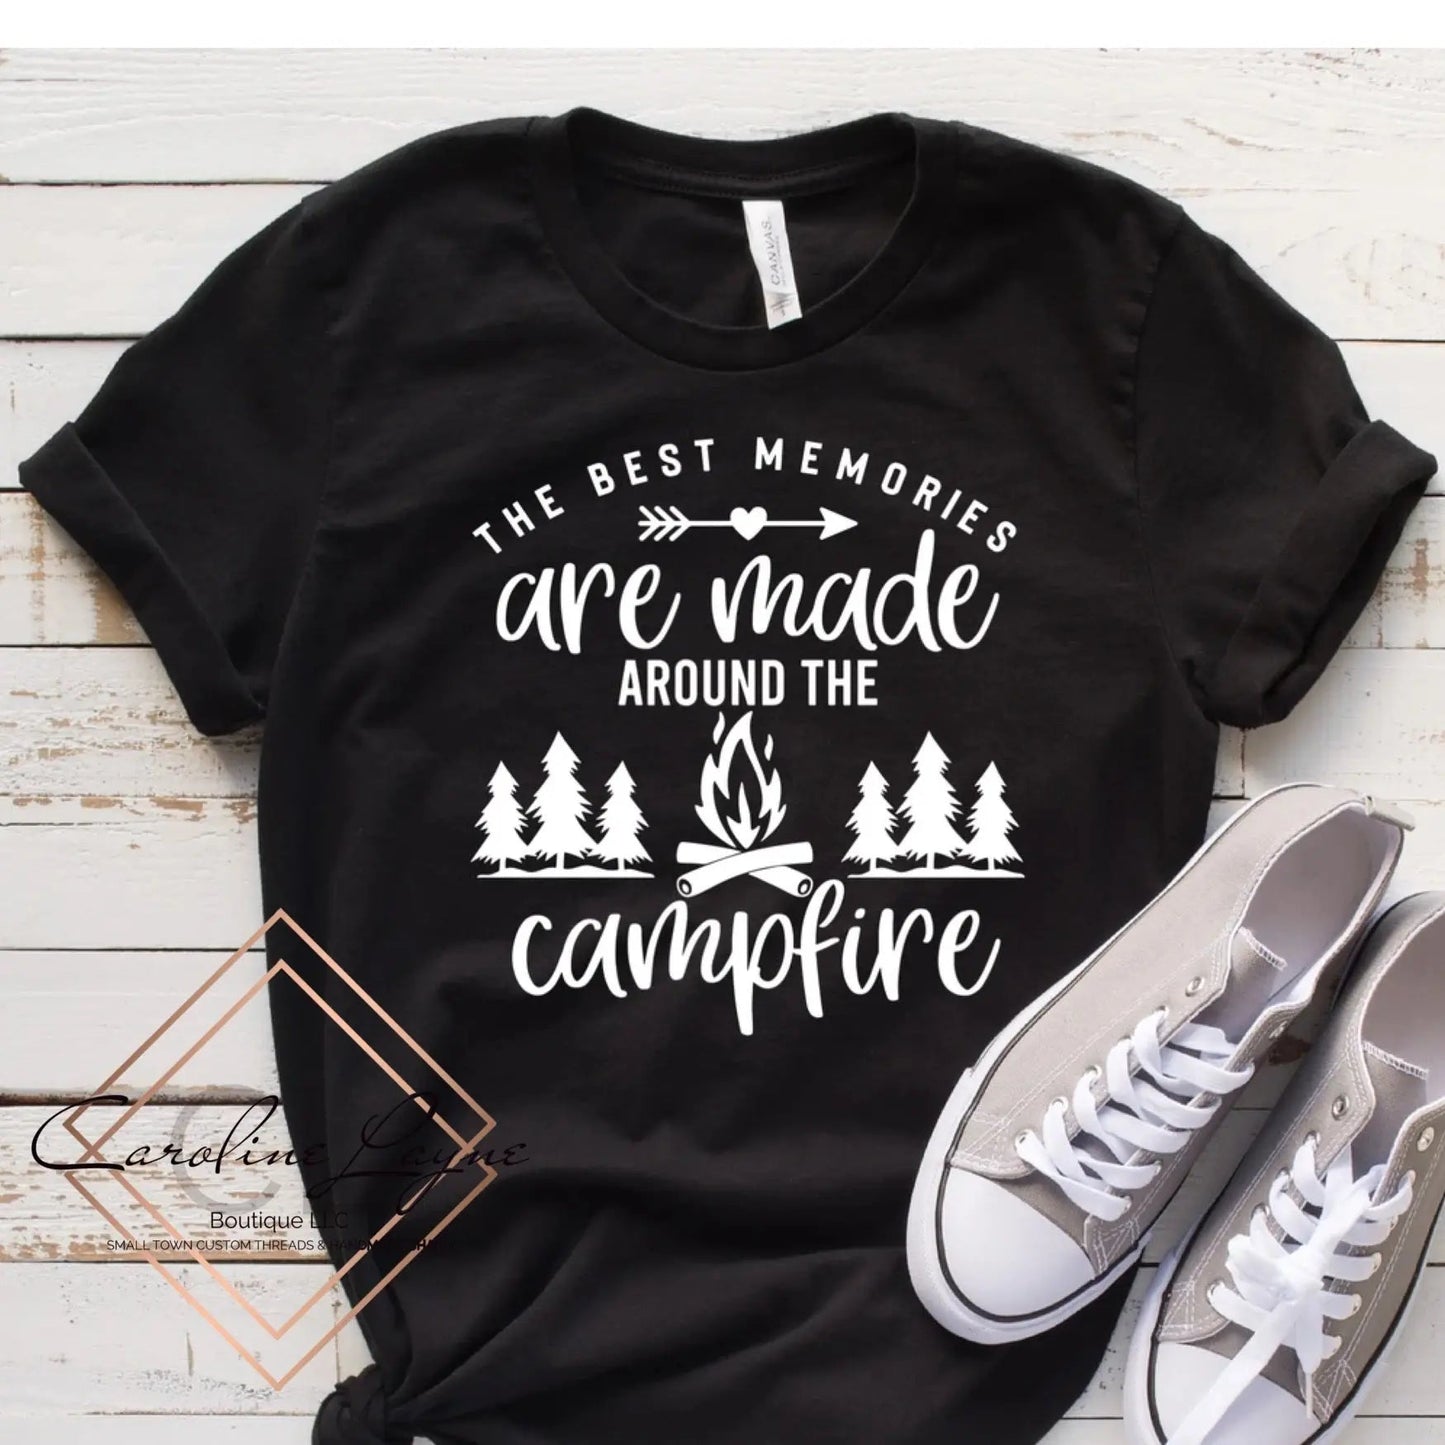 The Best Memories Are Made Around The Campfire Tee - Caroline Layne Boutique LLC